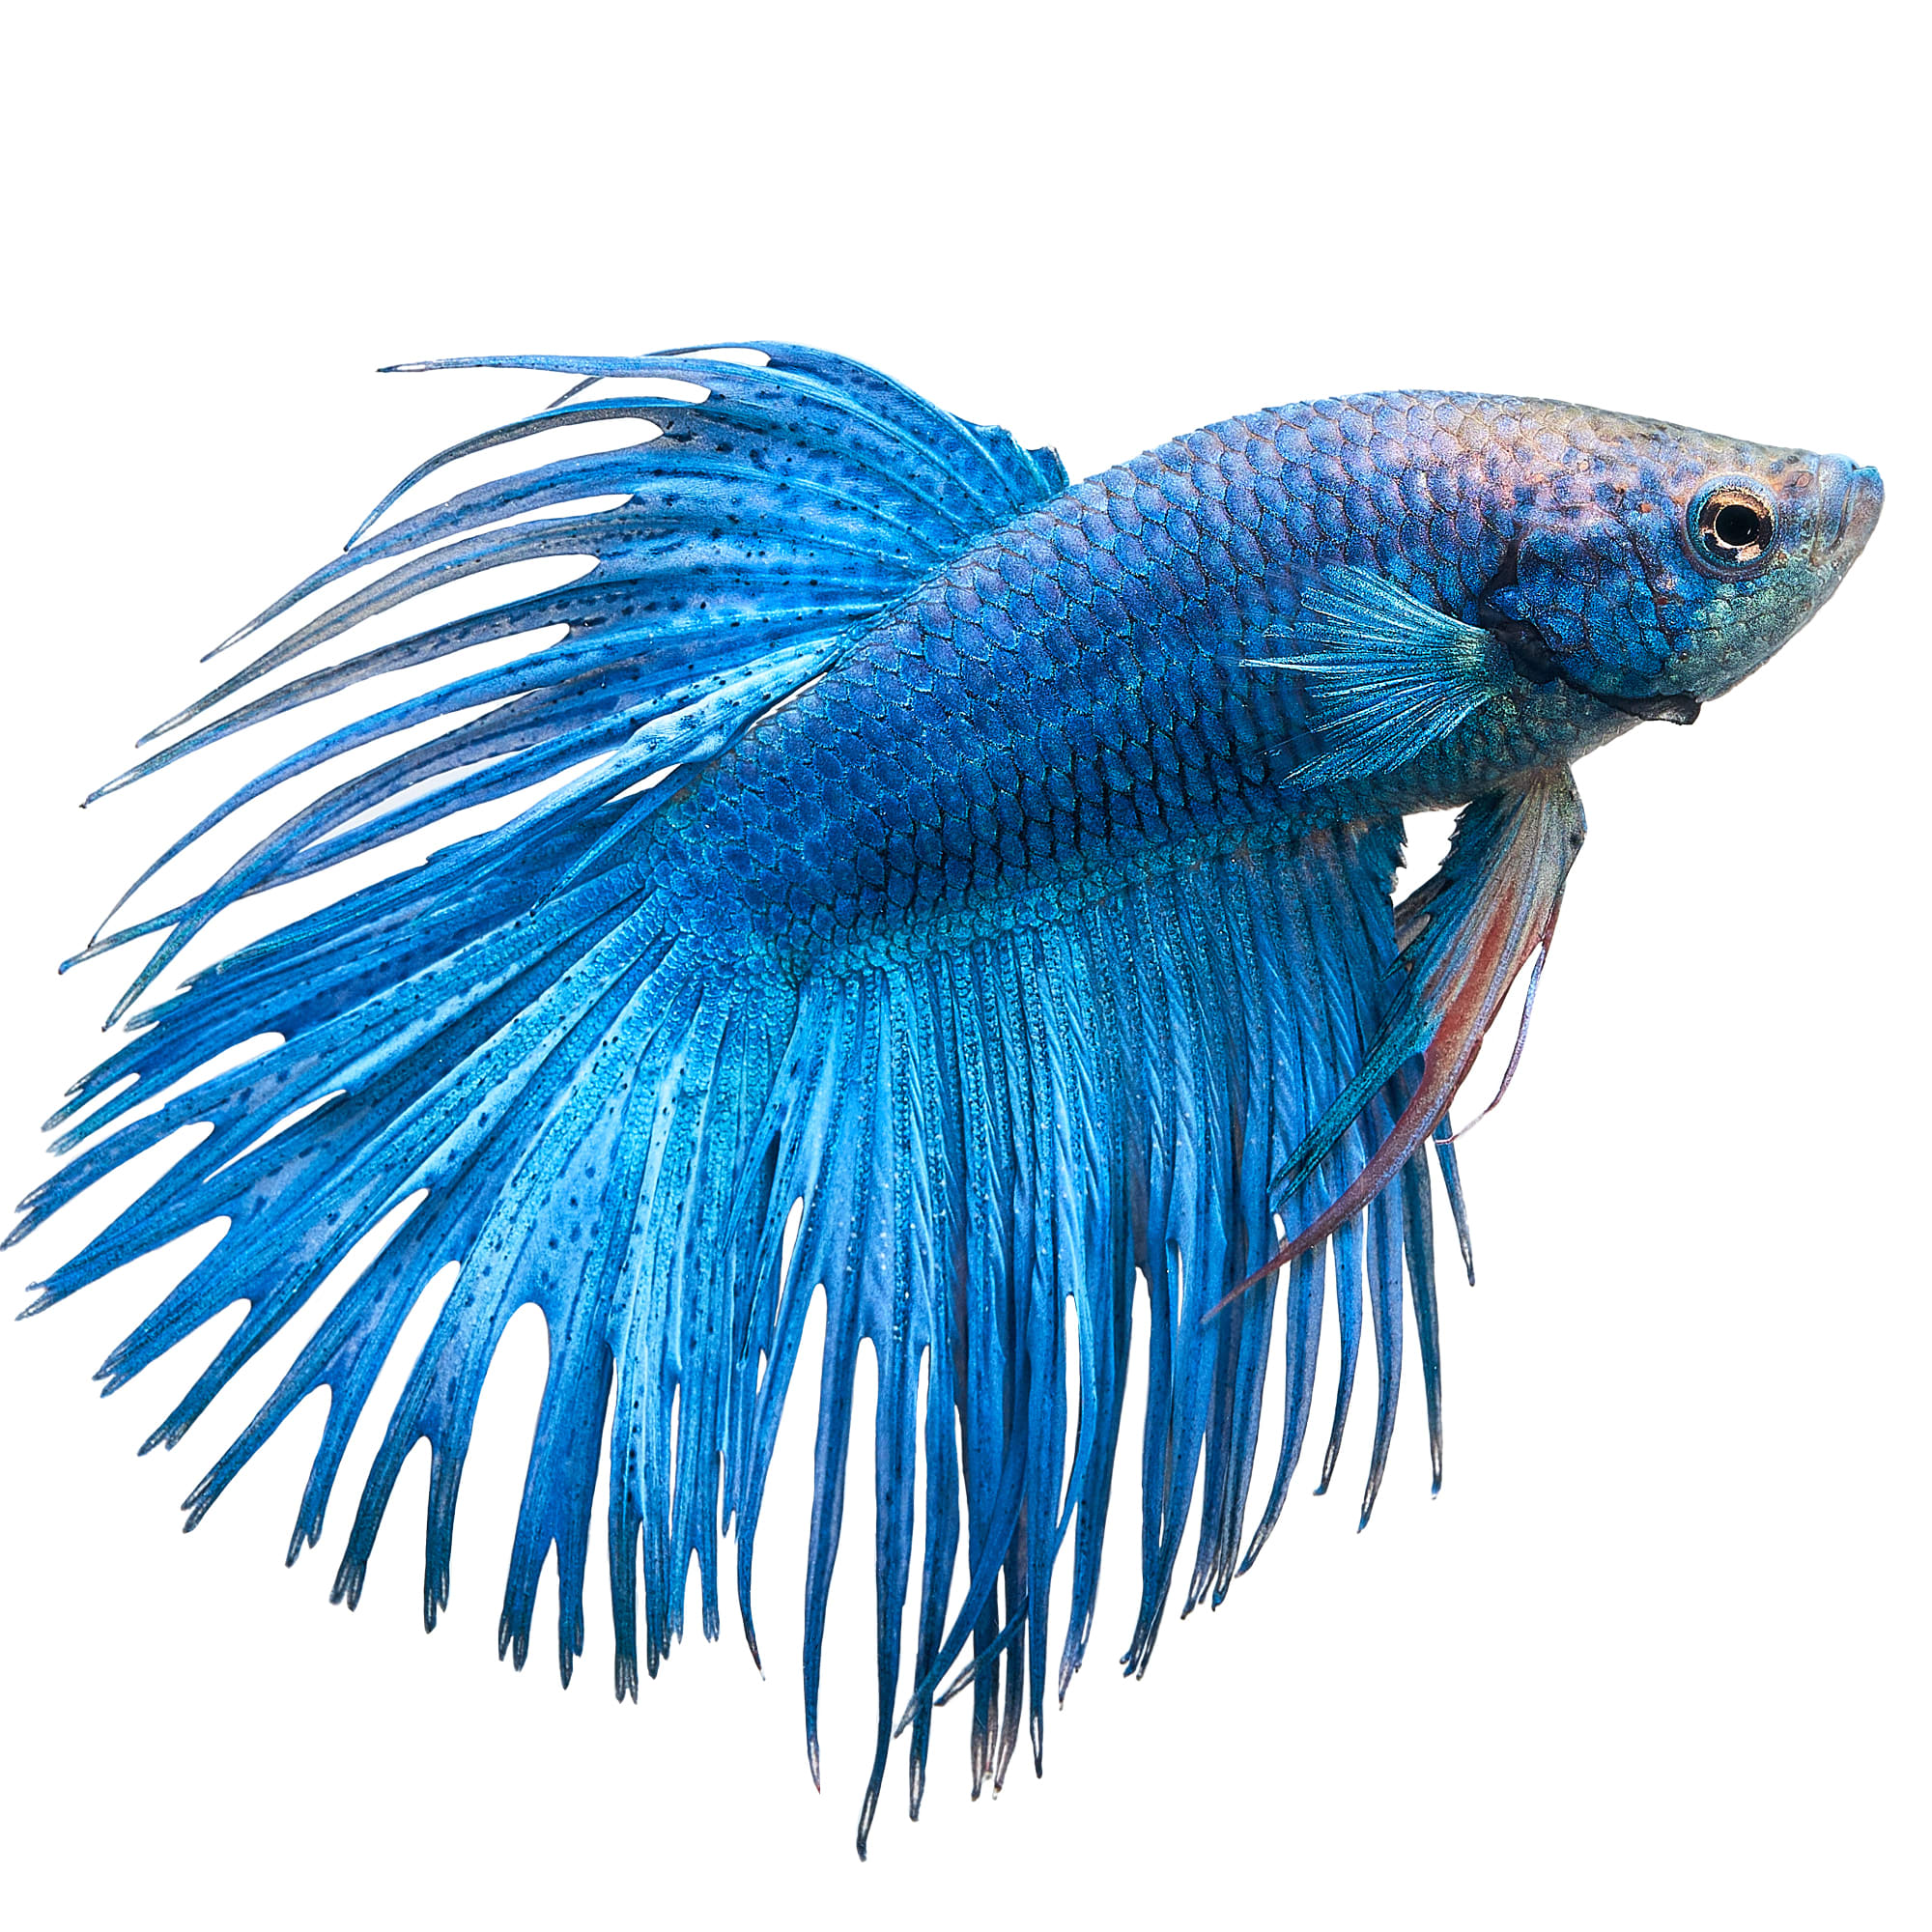 Male Crowntail Bettas for Sale: Order Online